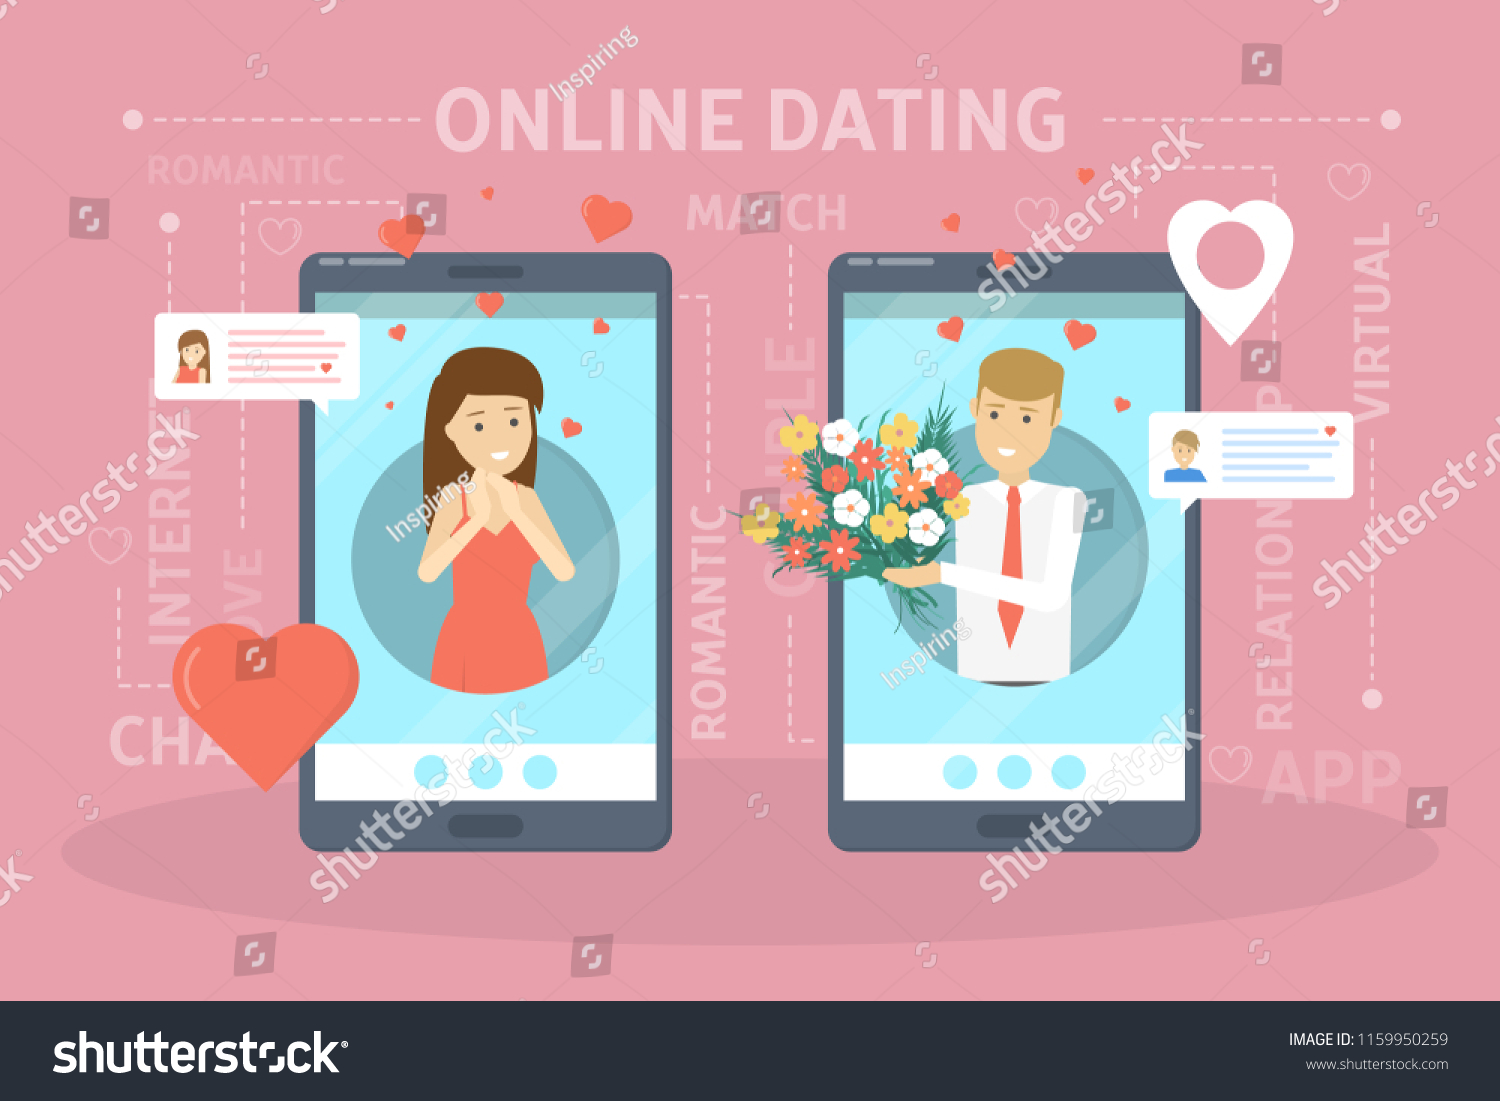 Online perfect dating match FriendFinder